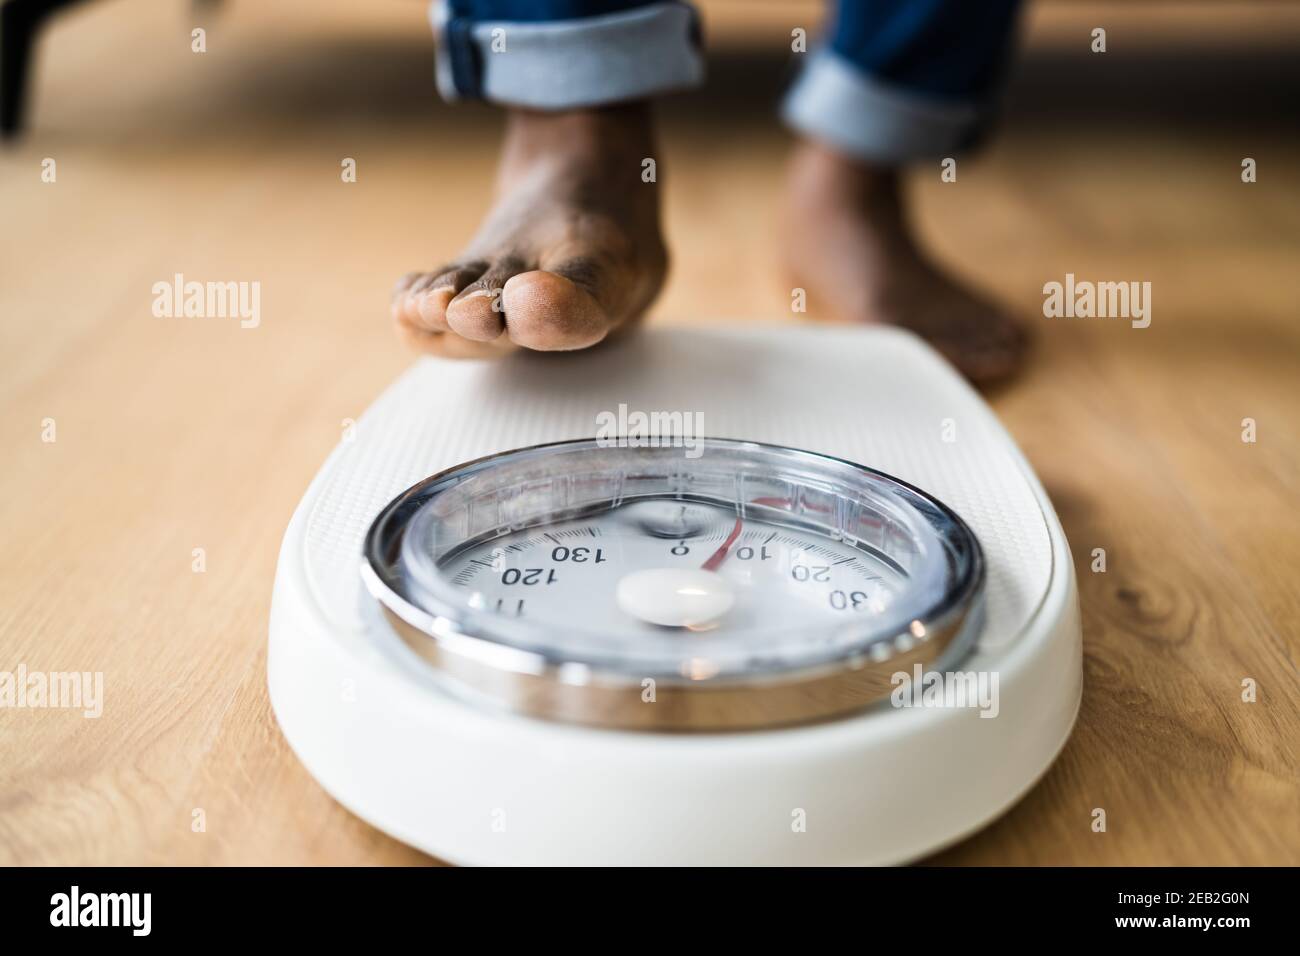 https://c8.alamy.com/comp/2EB2G0N/african-man-feet-standing-on-weight-scale-low-section-2EB2G0N.jpg